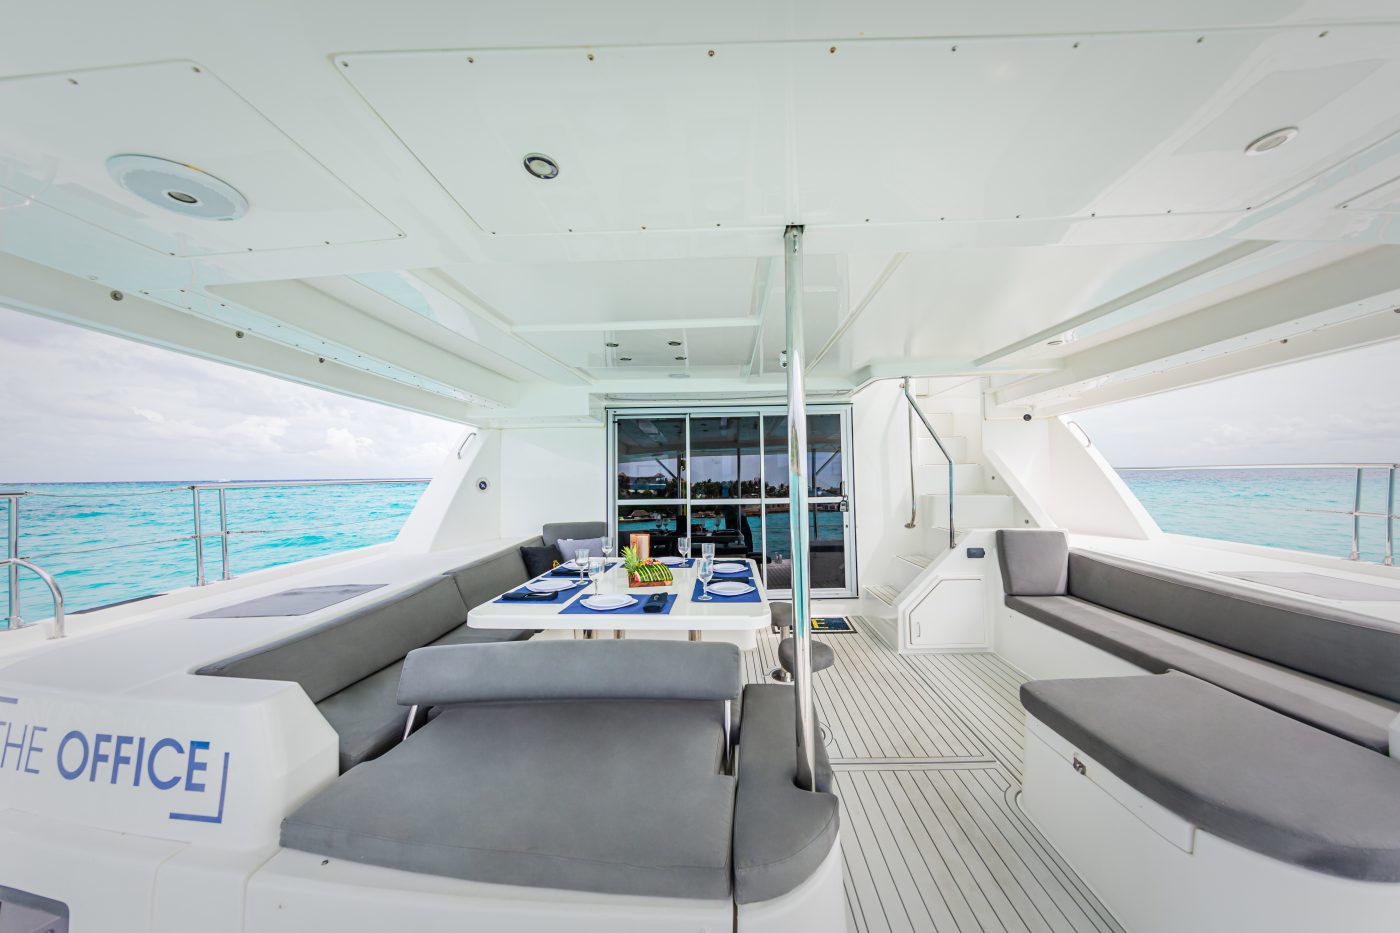 Leopard Catamaran for Luxury Yacht Charters from Cancun back space